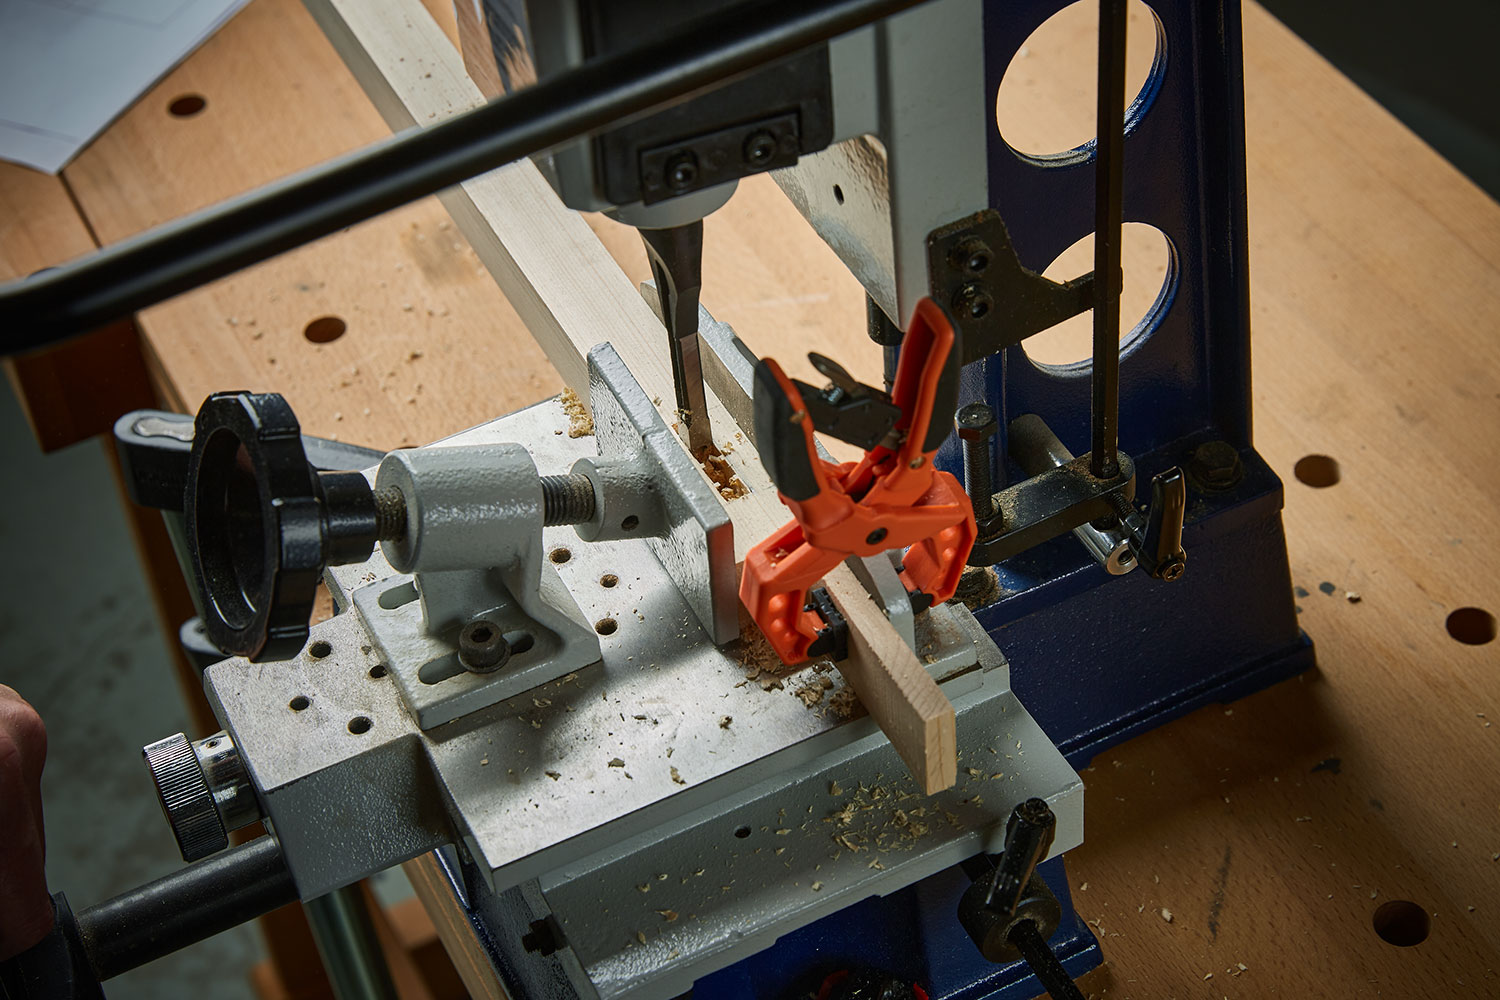 A mortise is being cut in a clamped board.